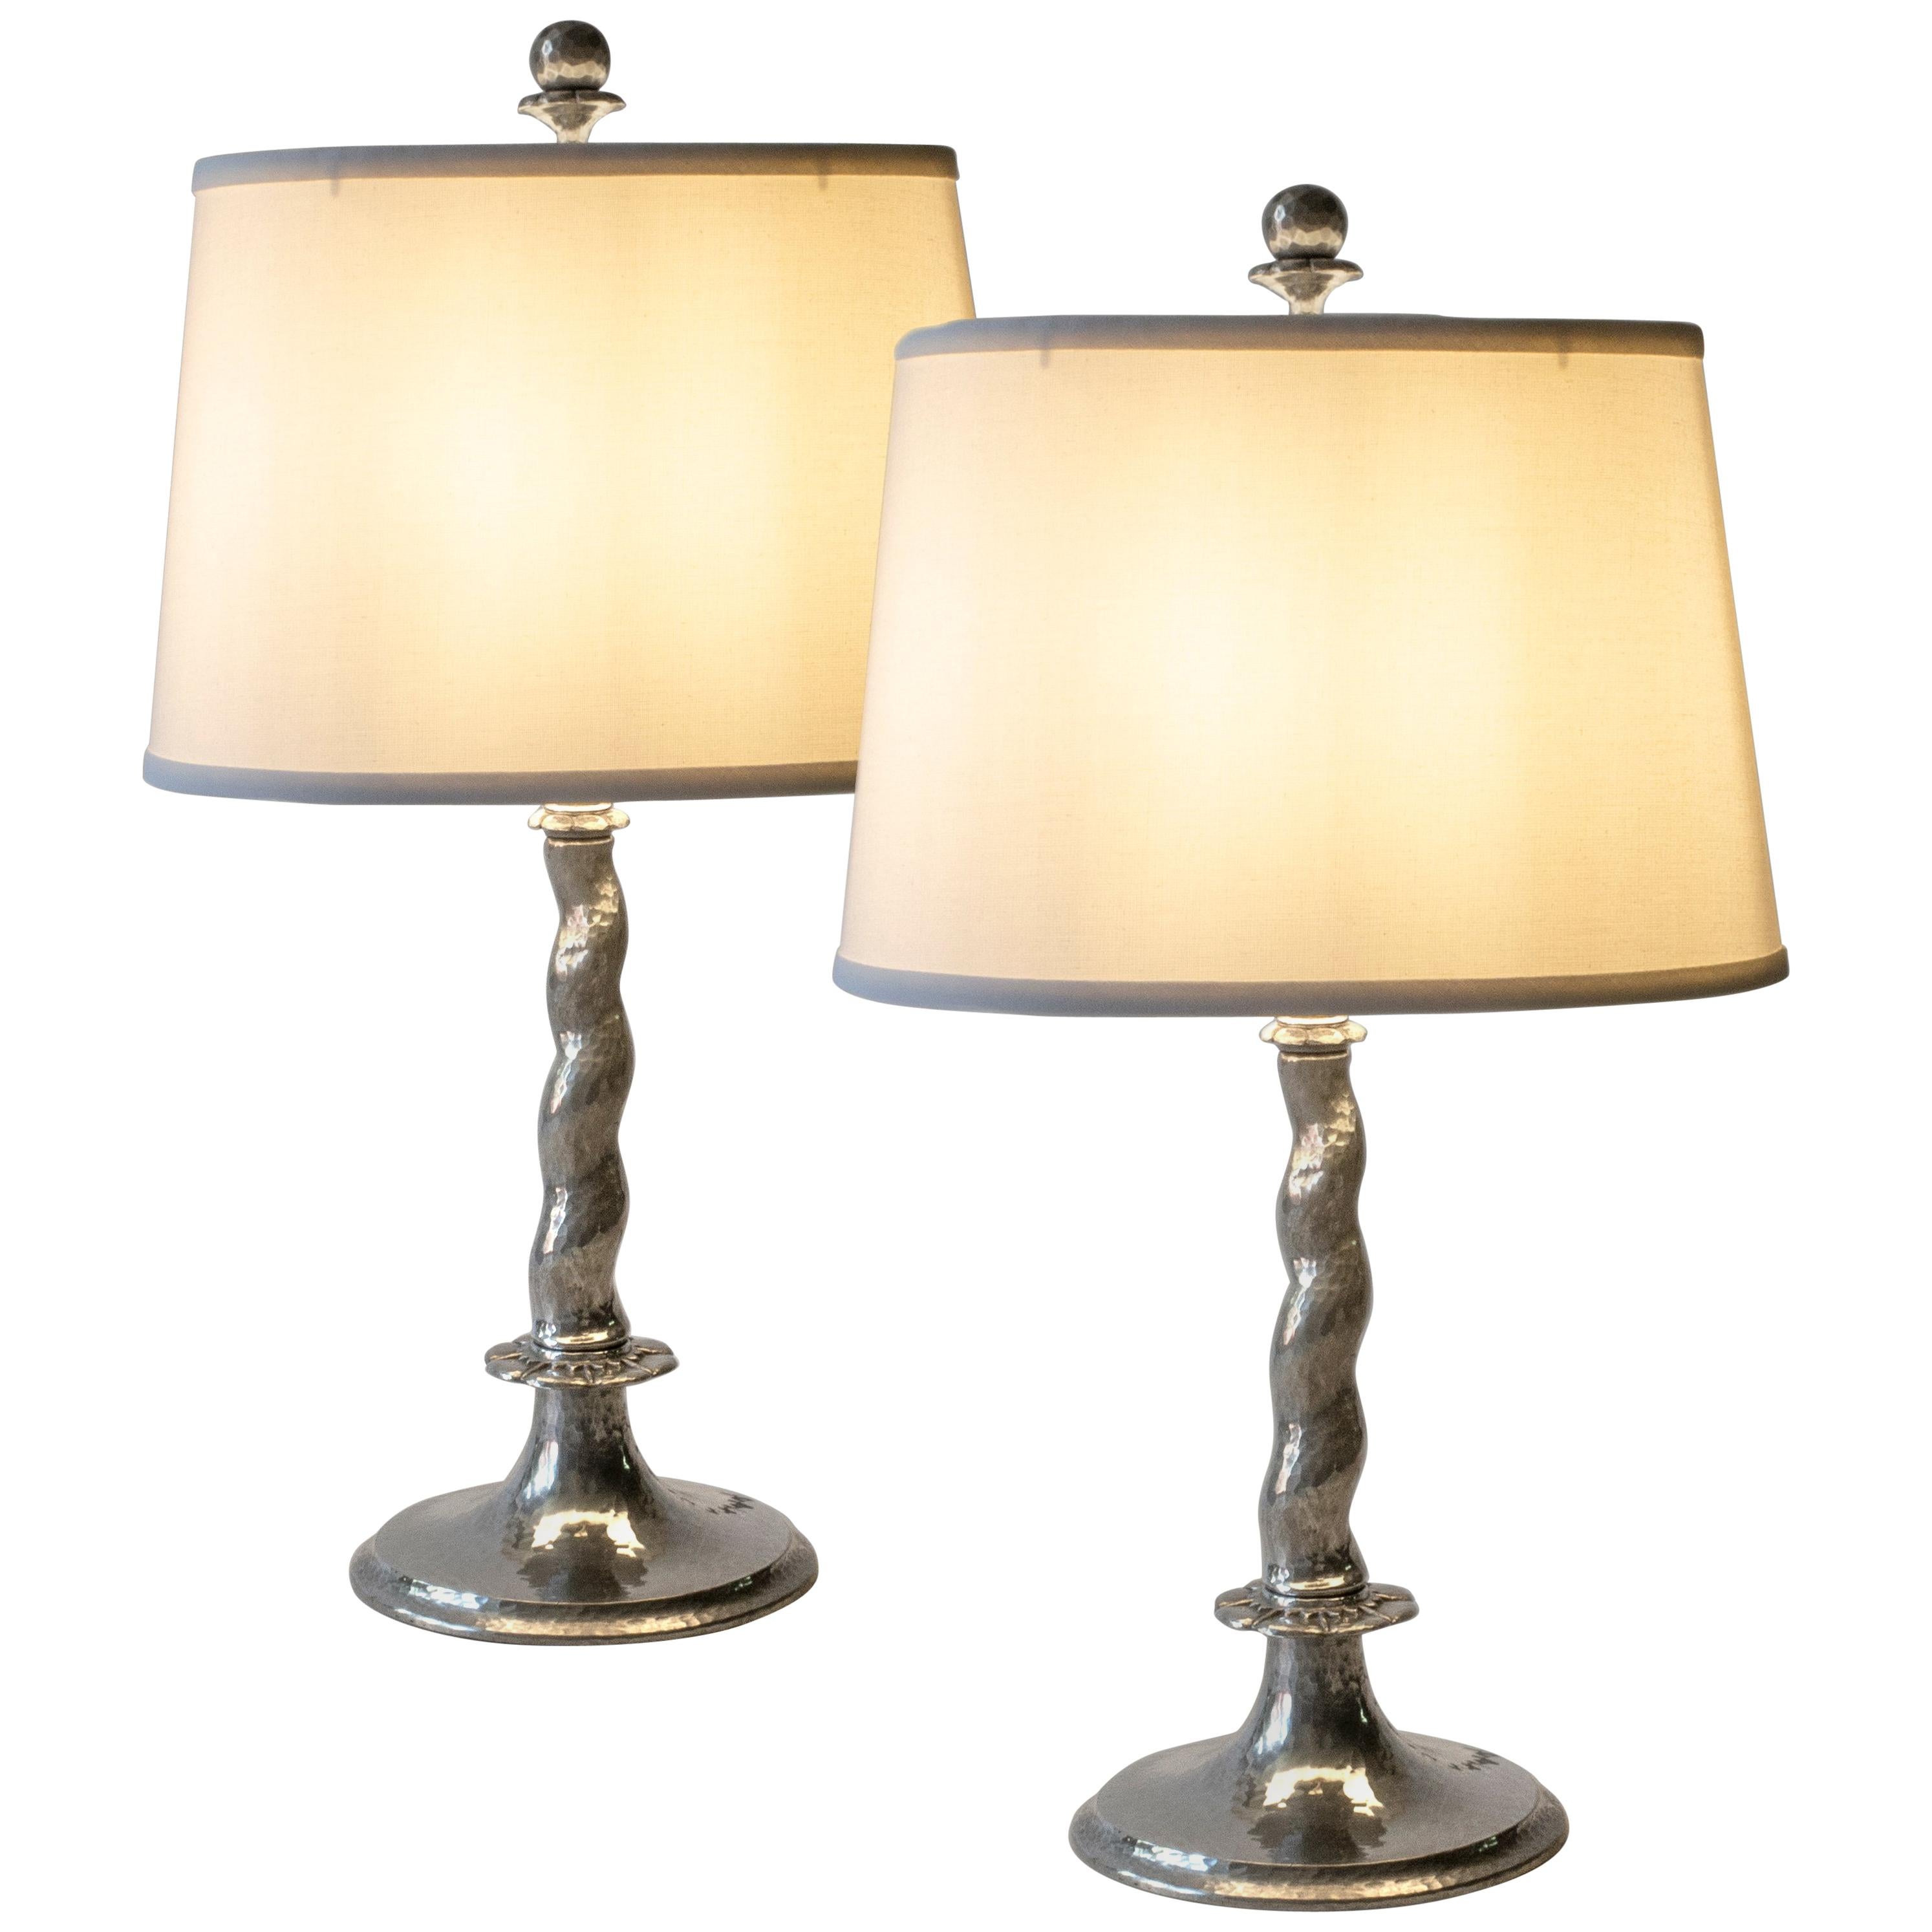 Pair of Rare Swedish Hammered Pewter Barley-Twist Table Lamps